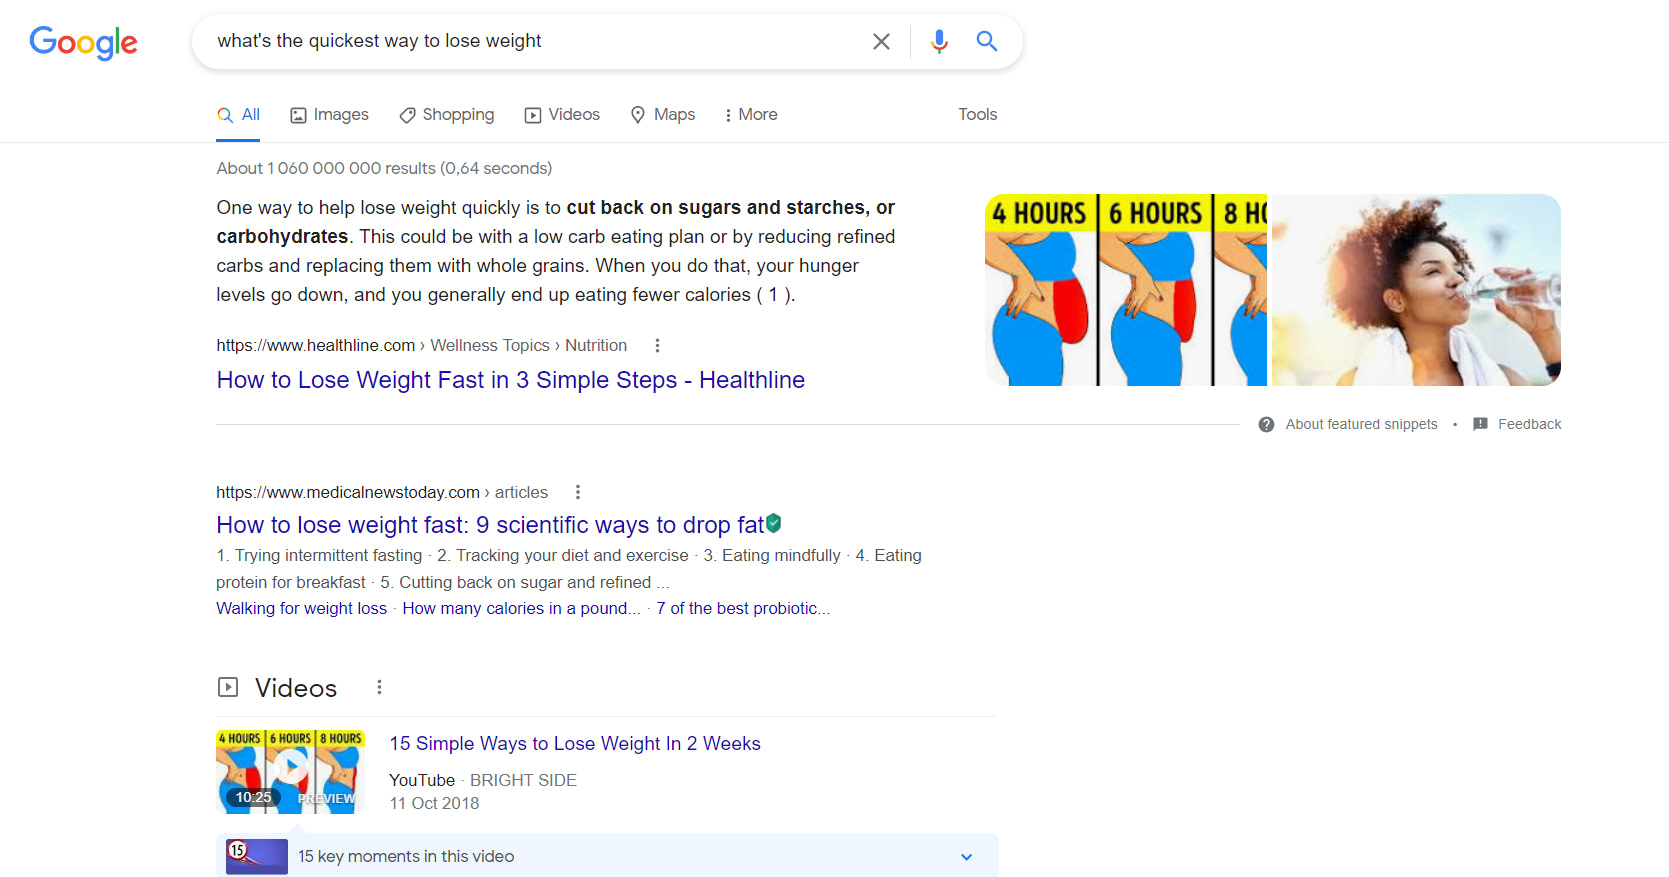 Search result - what's the quickest way to lose weight